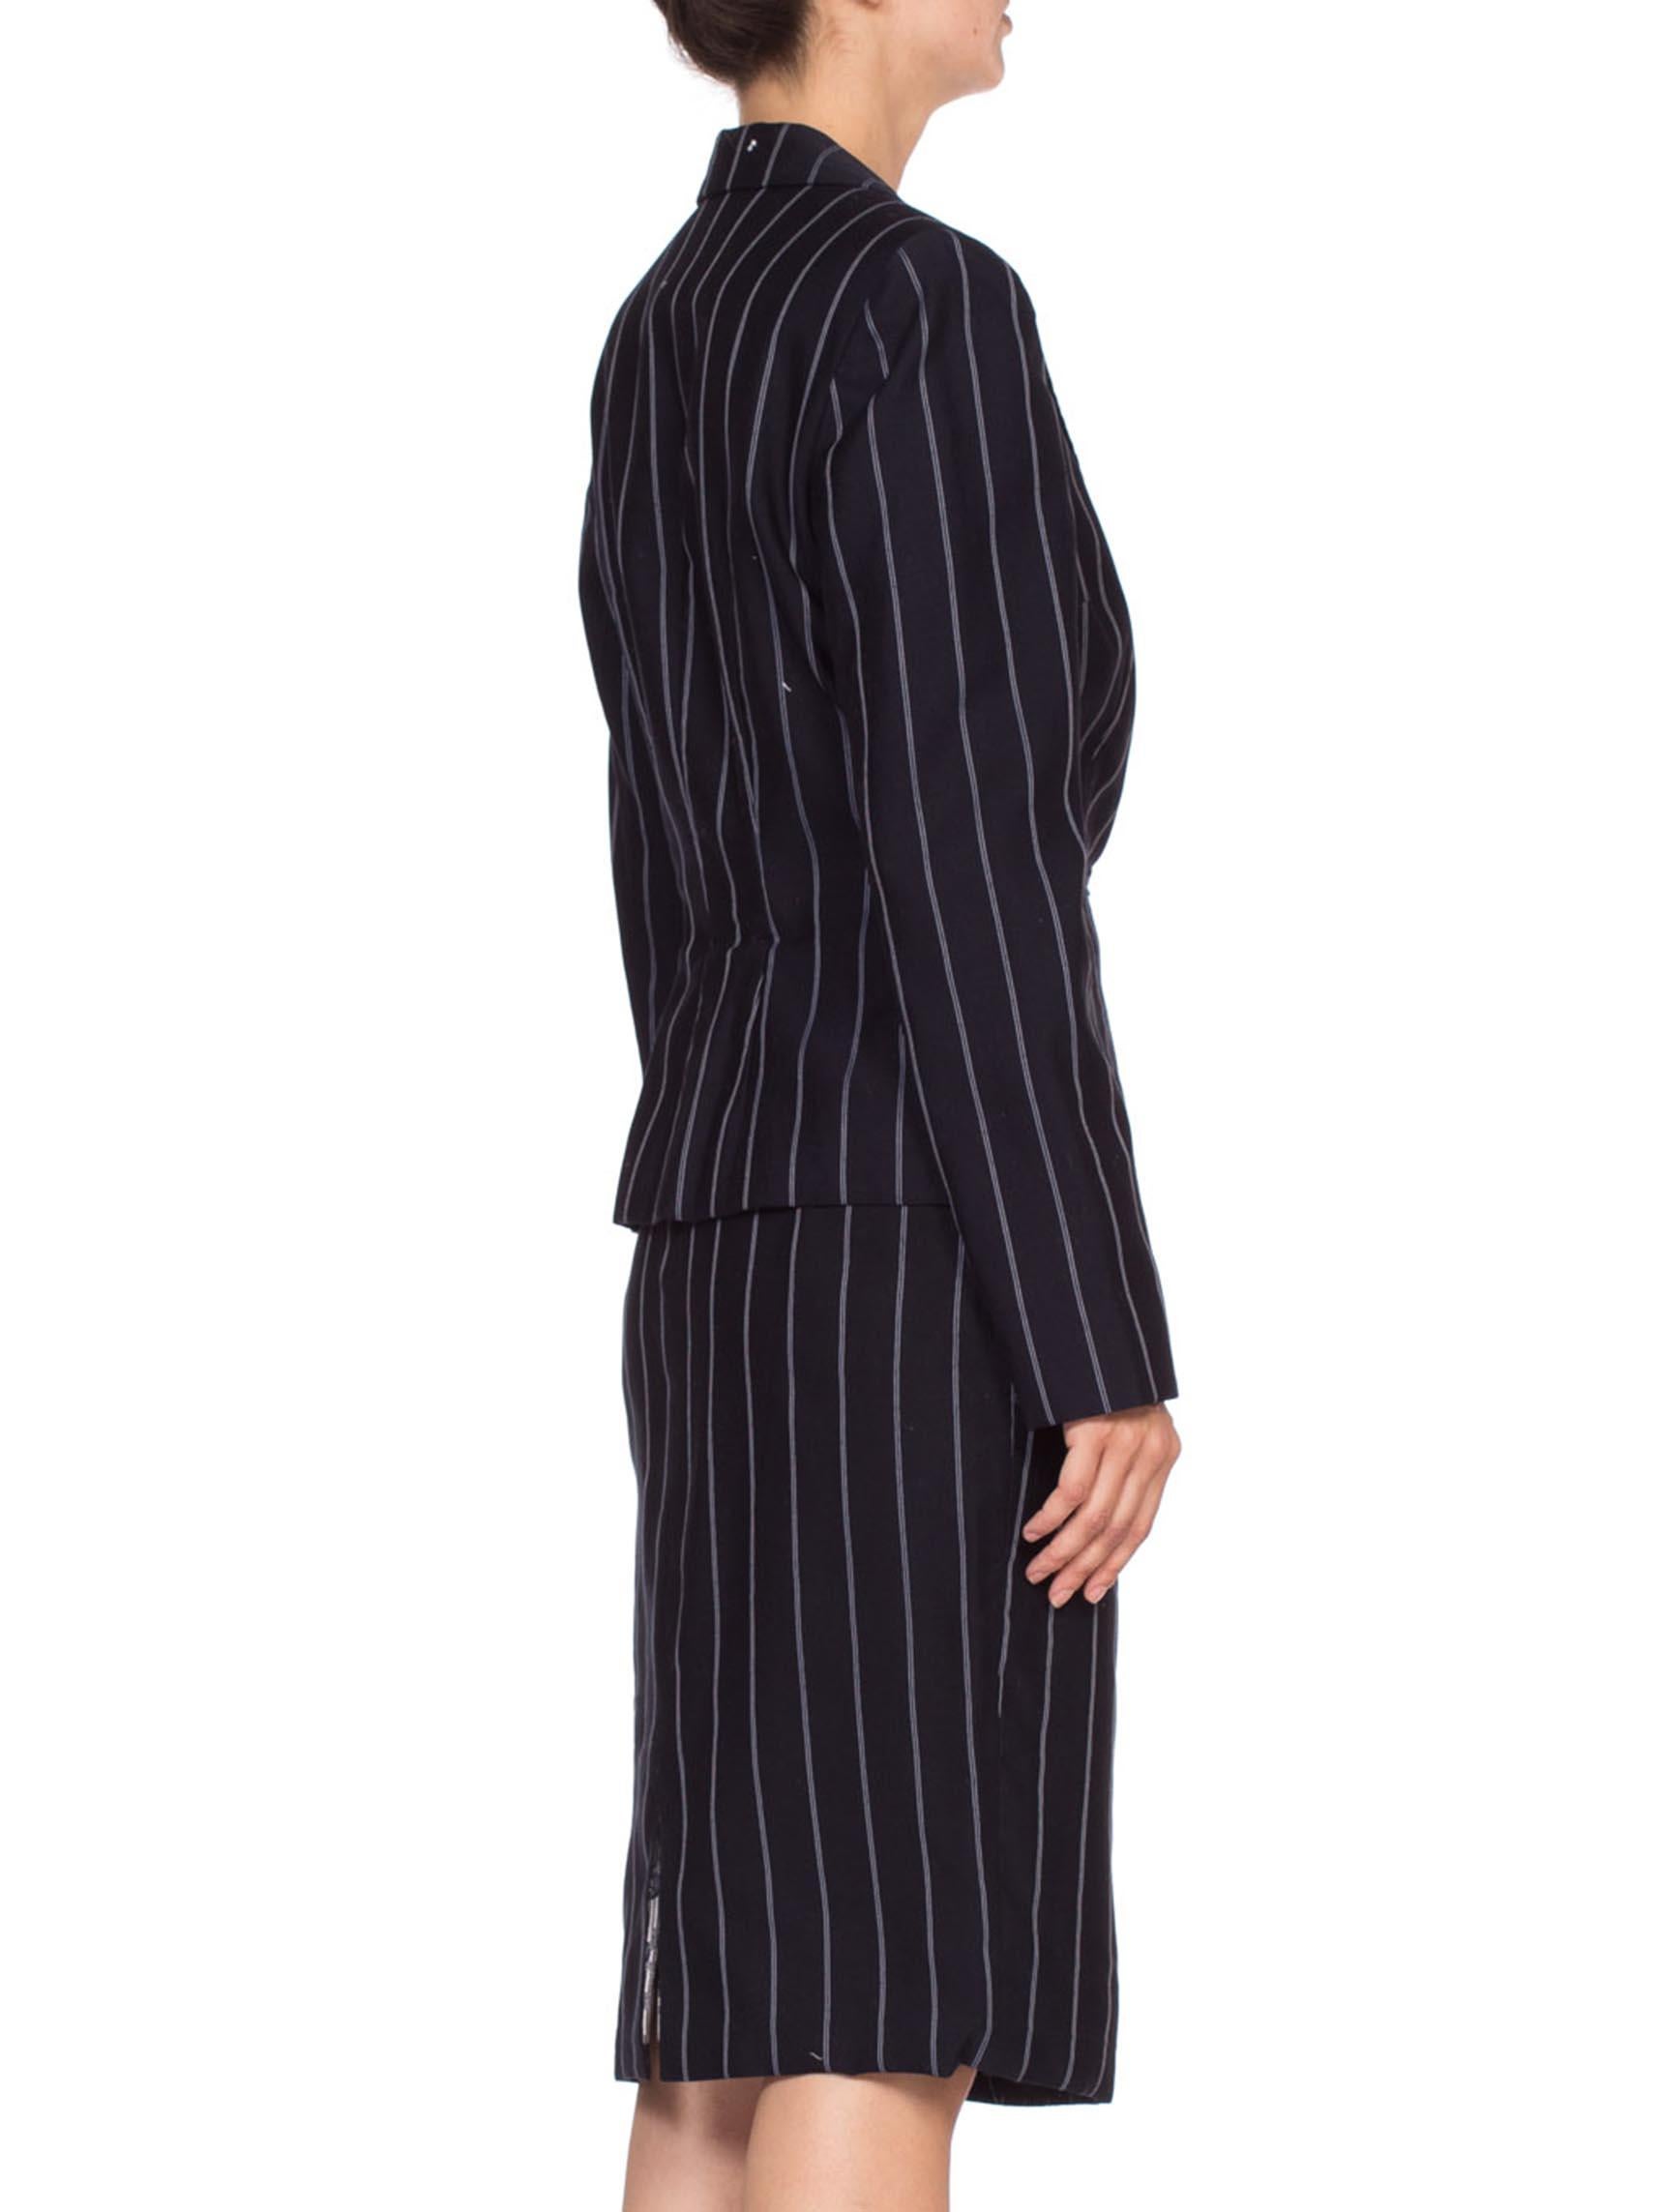 Women's 1990'S Navy Blue Pinstripe Rayon Blend Fitted Skirt Suit